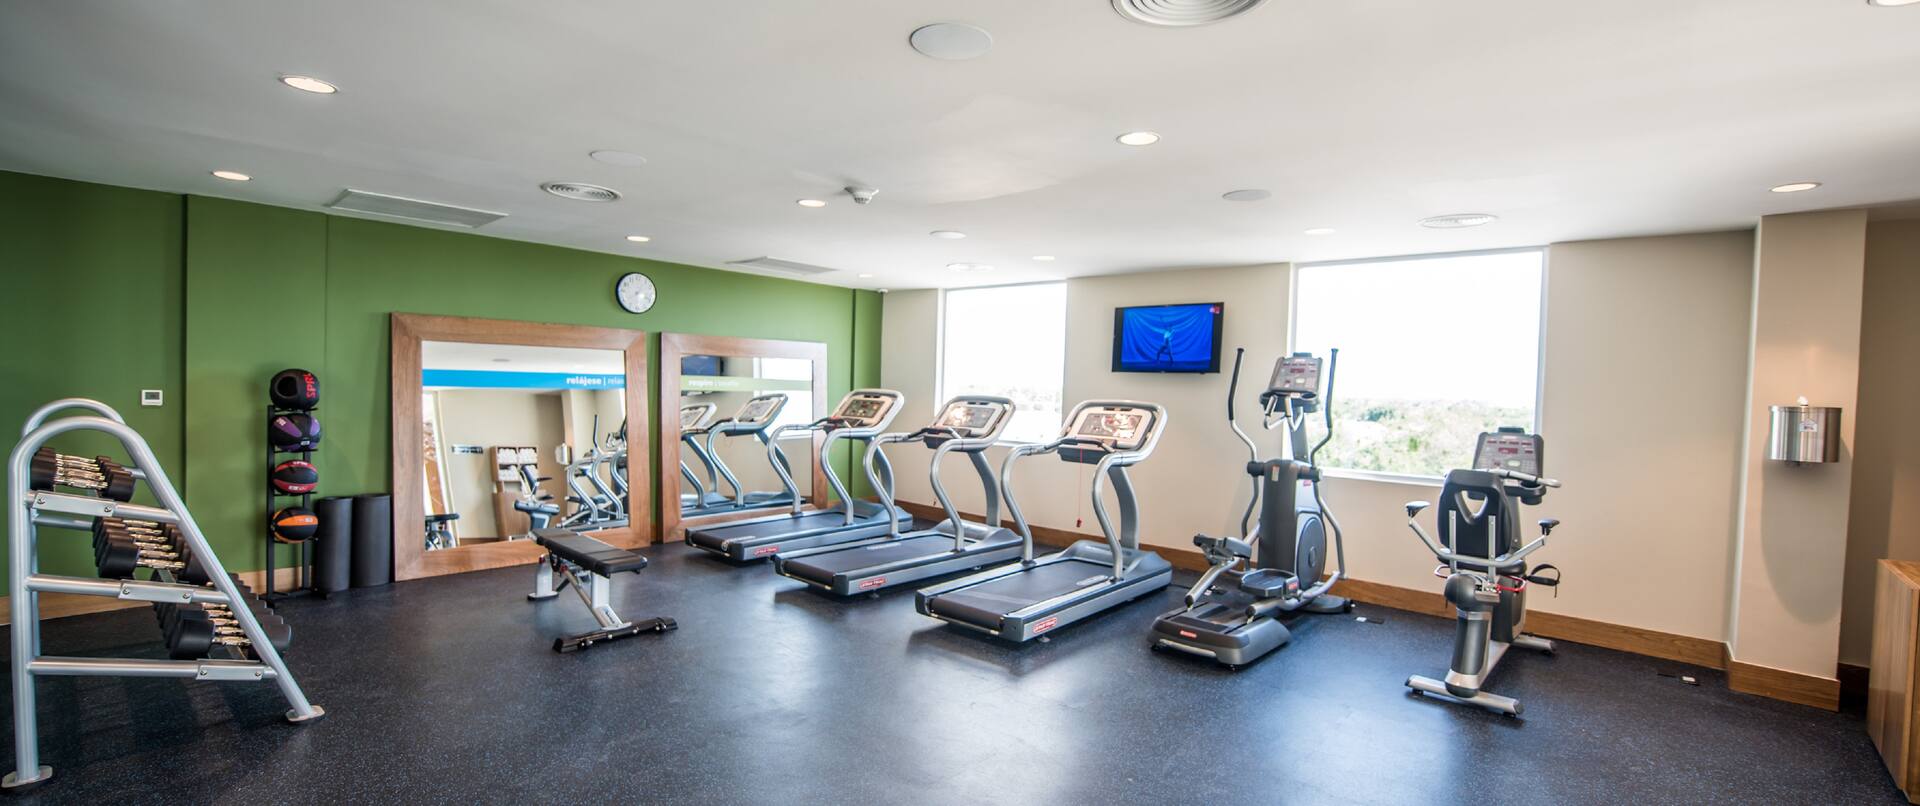 Fitness Center with Treadmills, Cross-Trainer, Cycle Machine and Dumbbell Rack